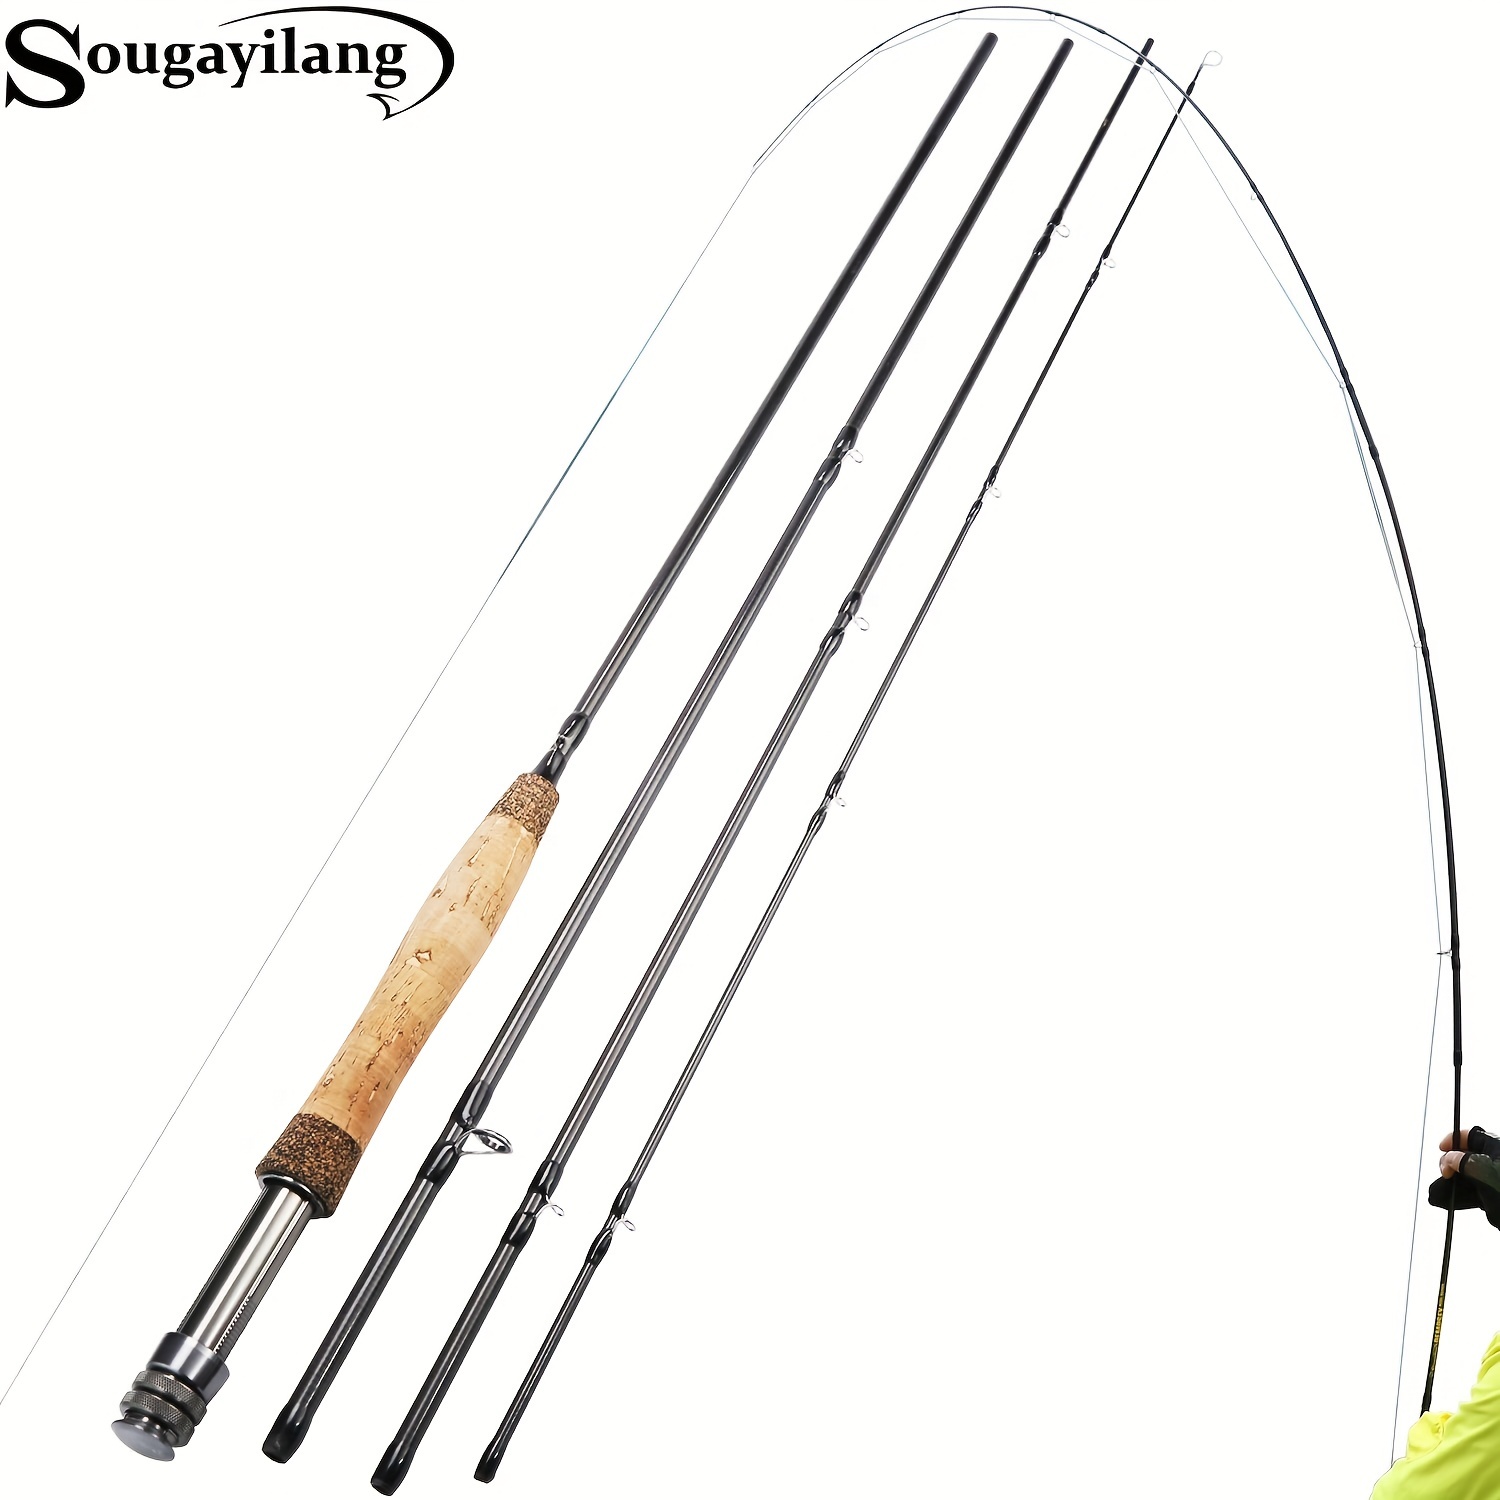 

Sougayilang 5/6wt Fly Fishing Rod, Lightweight Ultra-portable 4 Pieces Graphite Fly Rod For Complete Starter